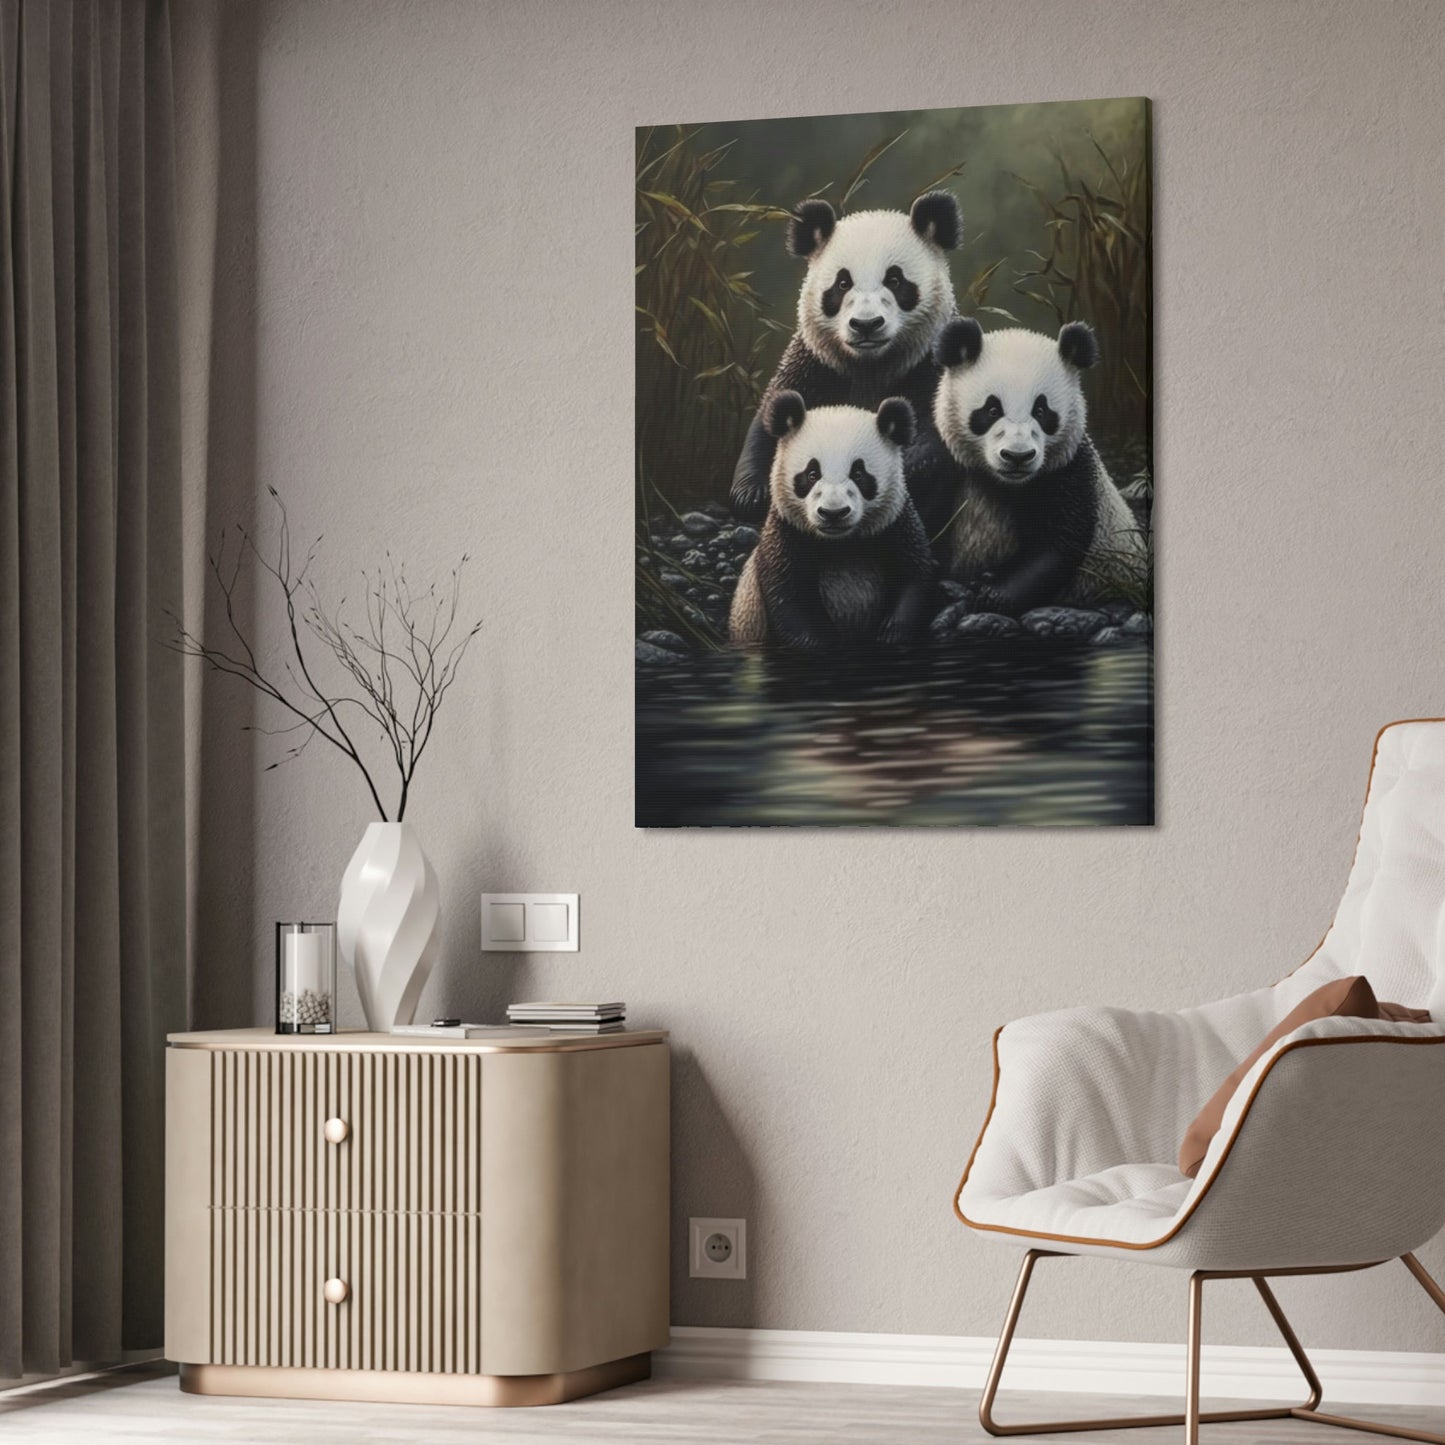 A Window to the World of Pandas: A Canvas That Captures their Spirit